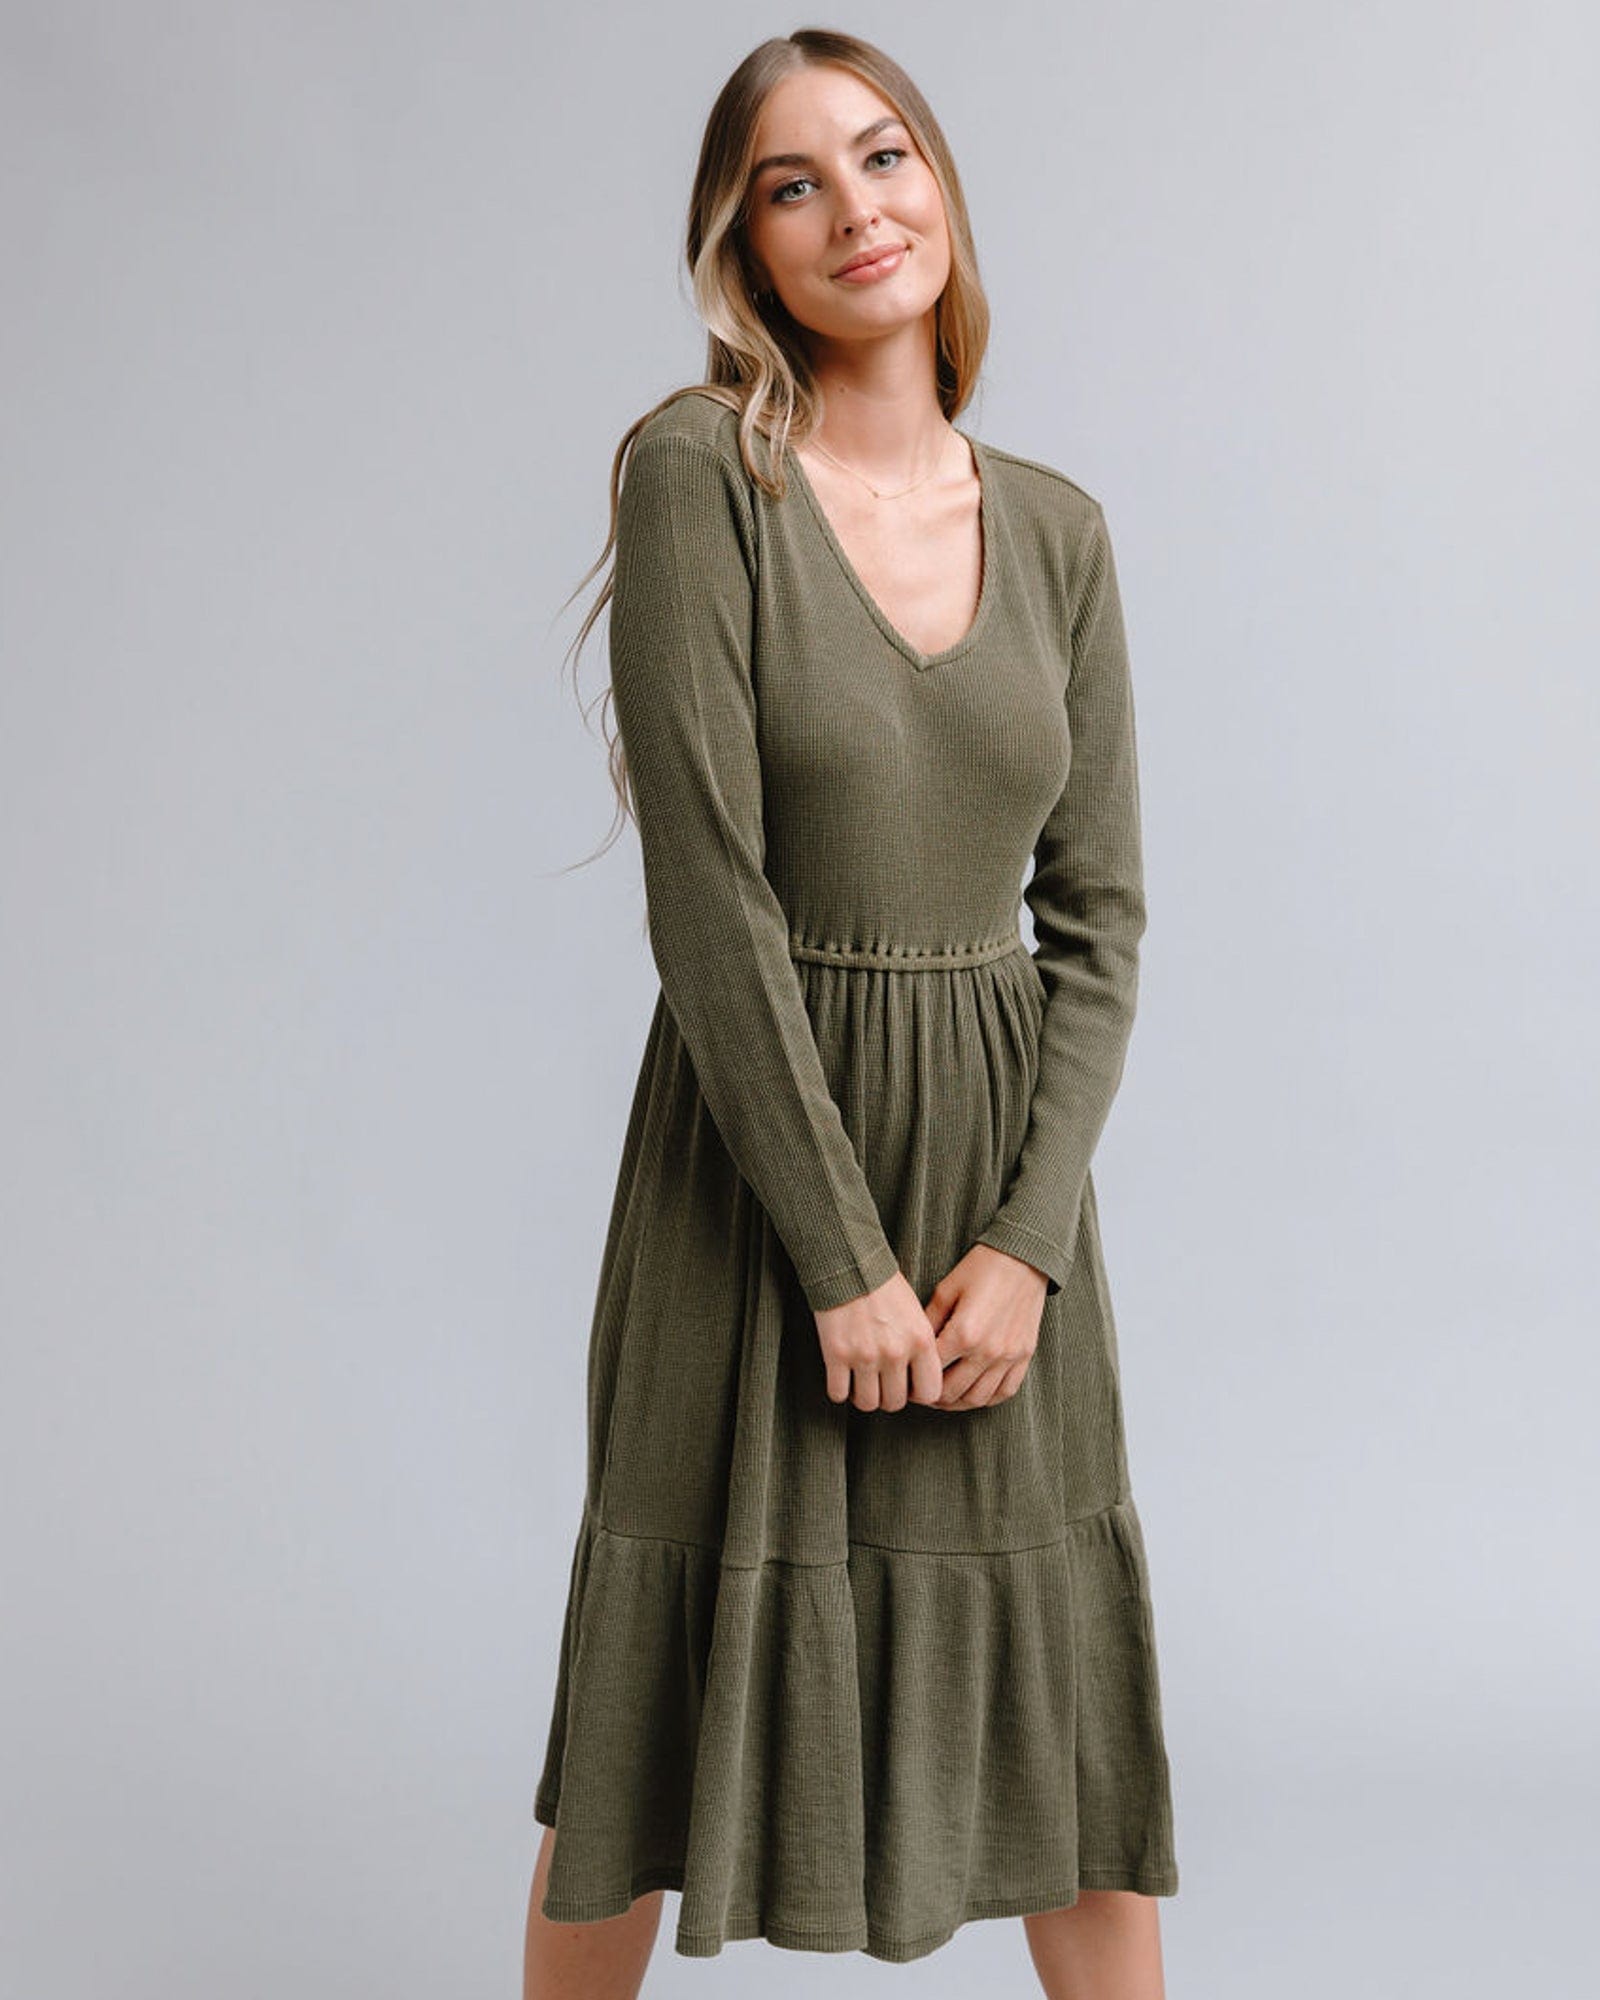 Woman in a long sleeve, v-neck, midi-length, olive green dress